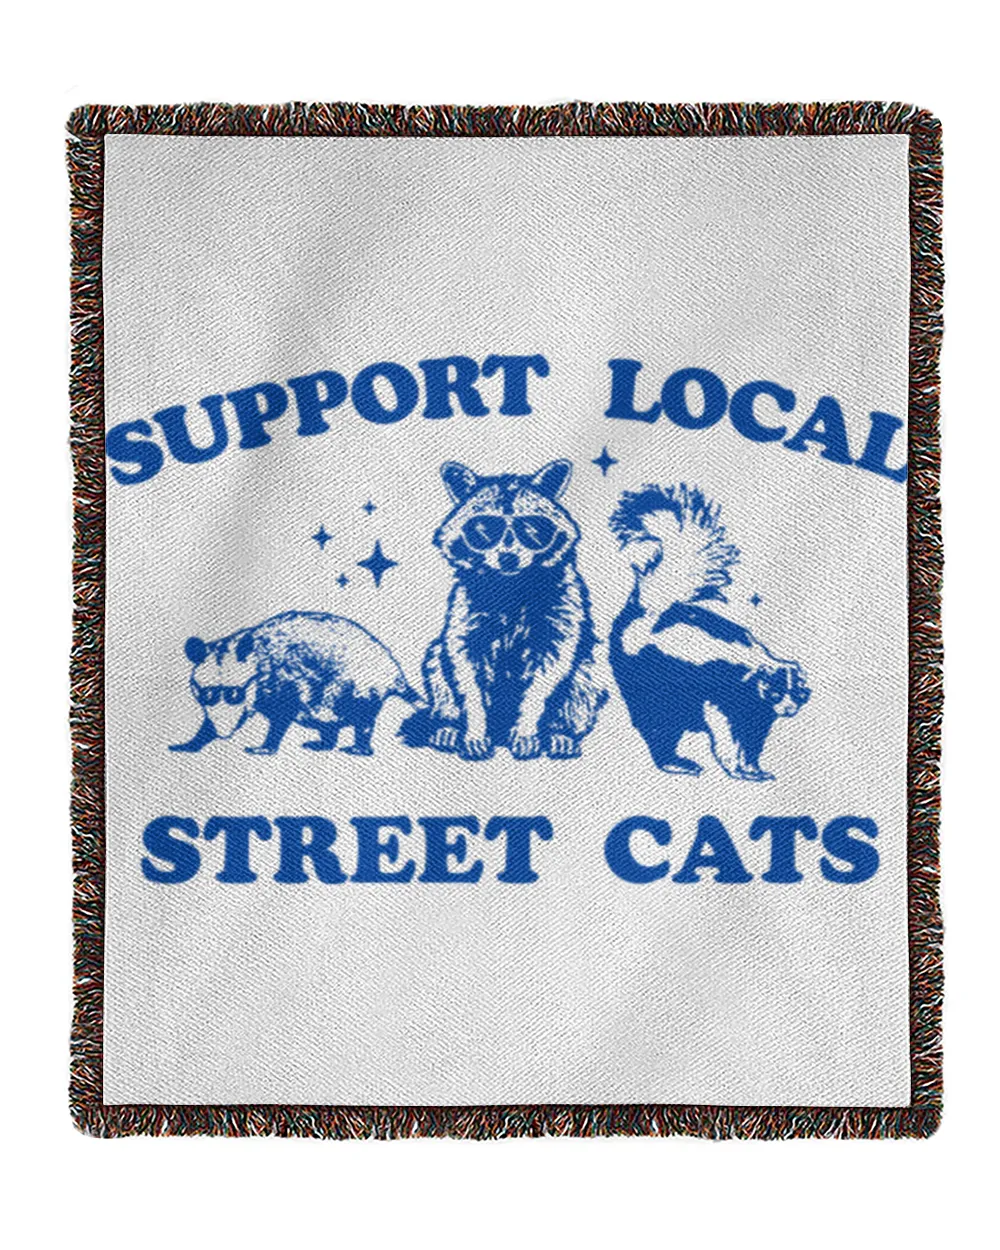 Support Your Local Street Cats Graphic T-Shirt, funny raccoon meme shirt, Vintage Raccoon T Shirt, Nostalgia